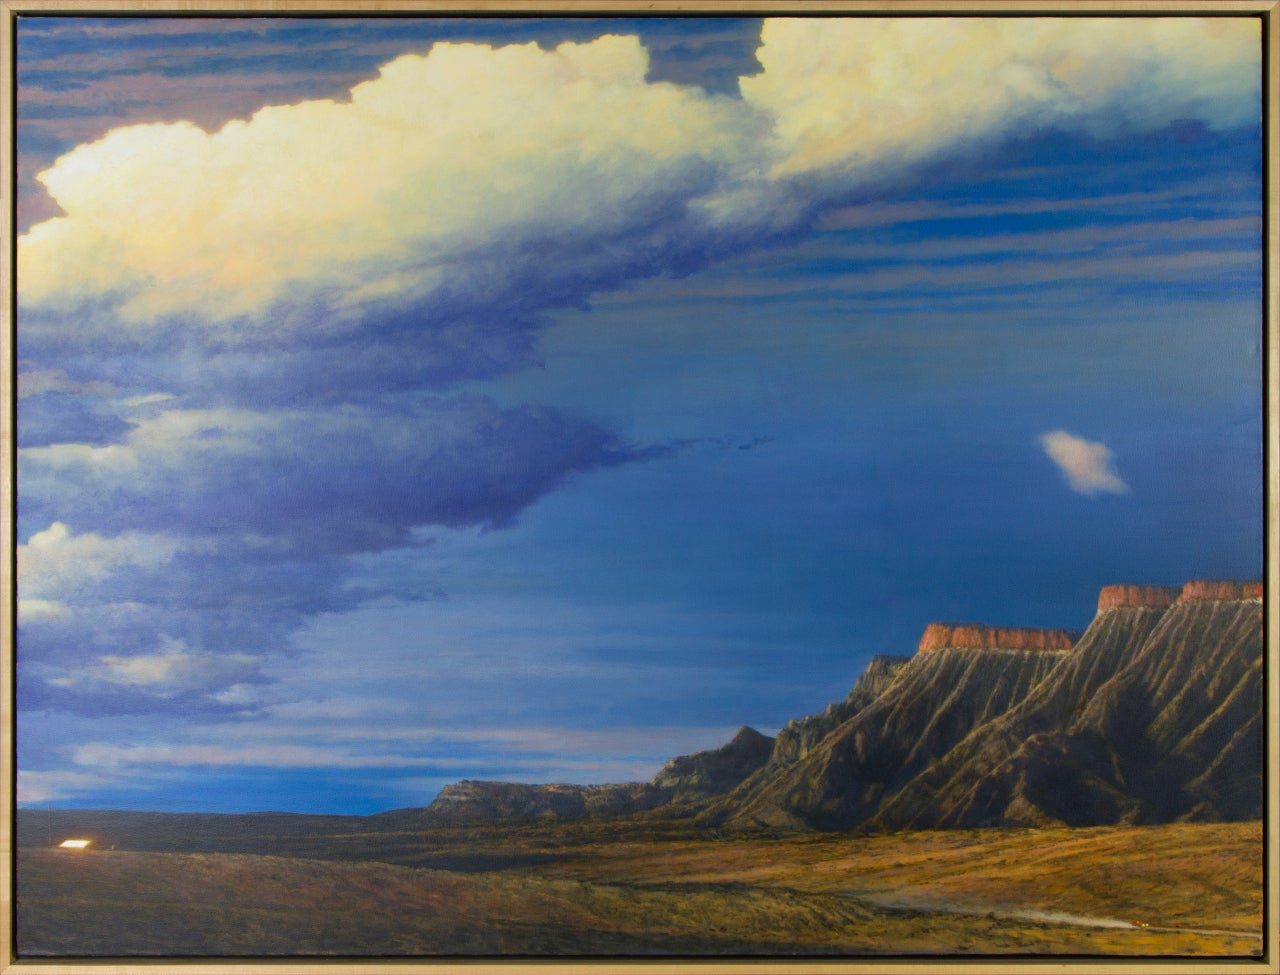 William Glen Crooks Landscape Painting - The Powers That Be